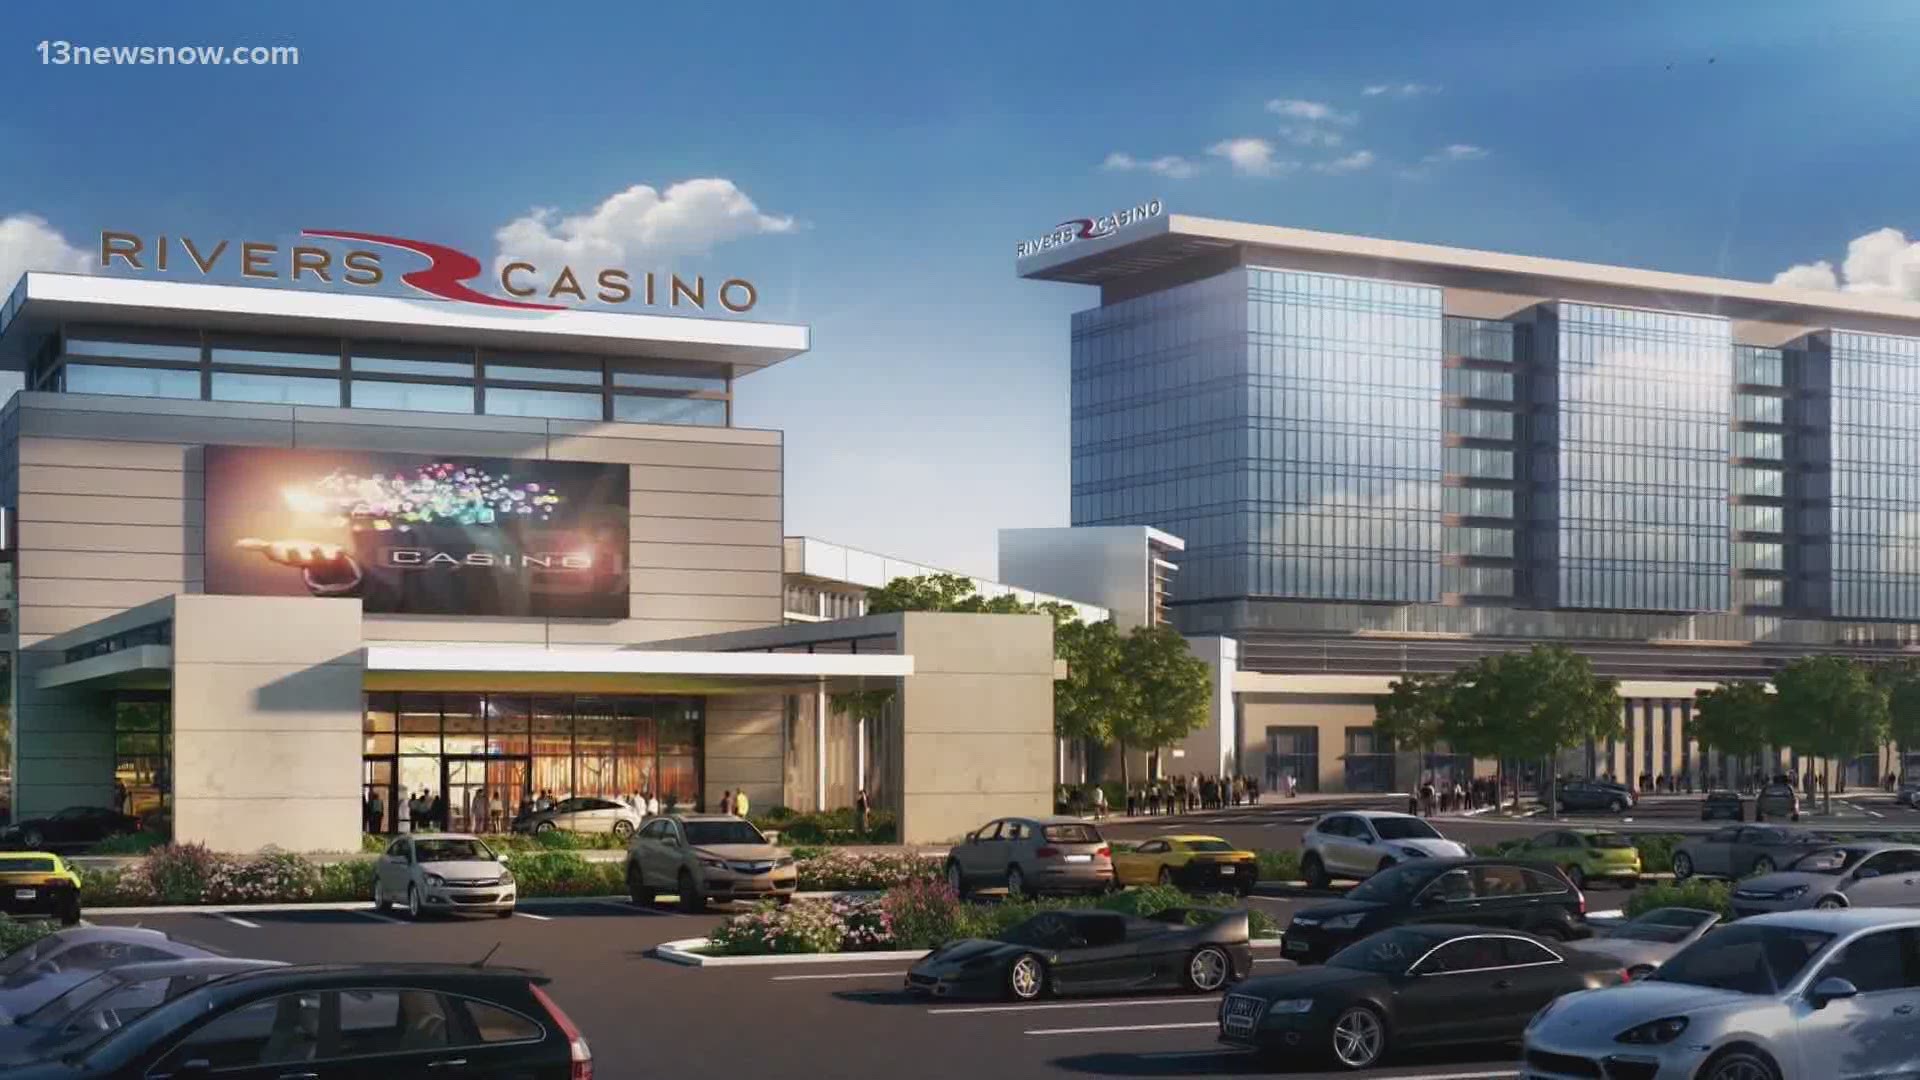 The City of Portsmouth and Rush Street Gaming released mockups of the proposed casino called Rivers Casino Portsmouth.